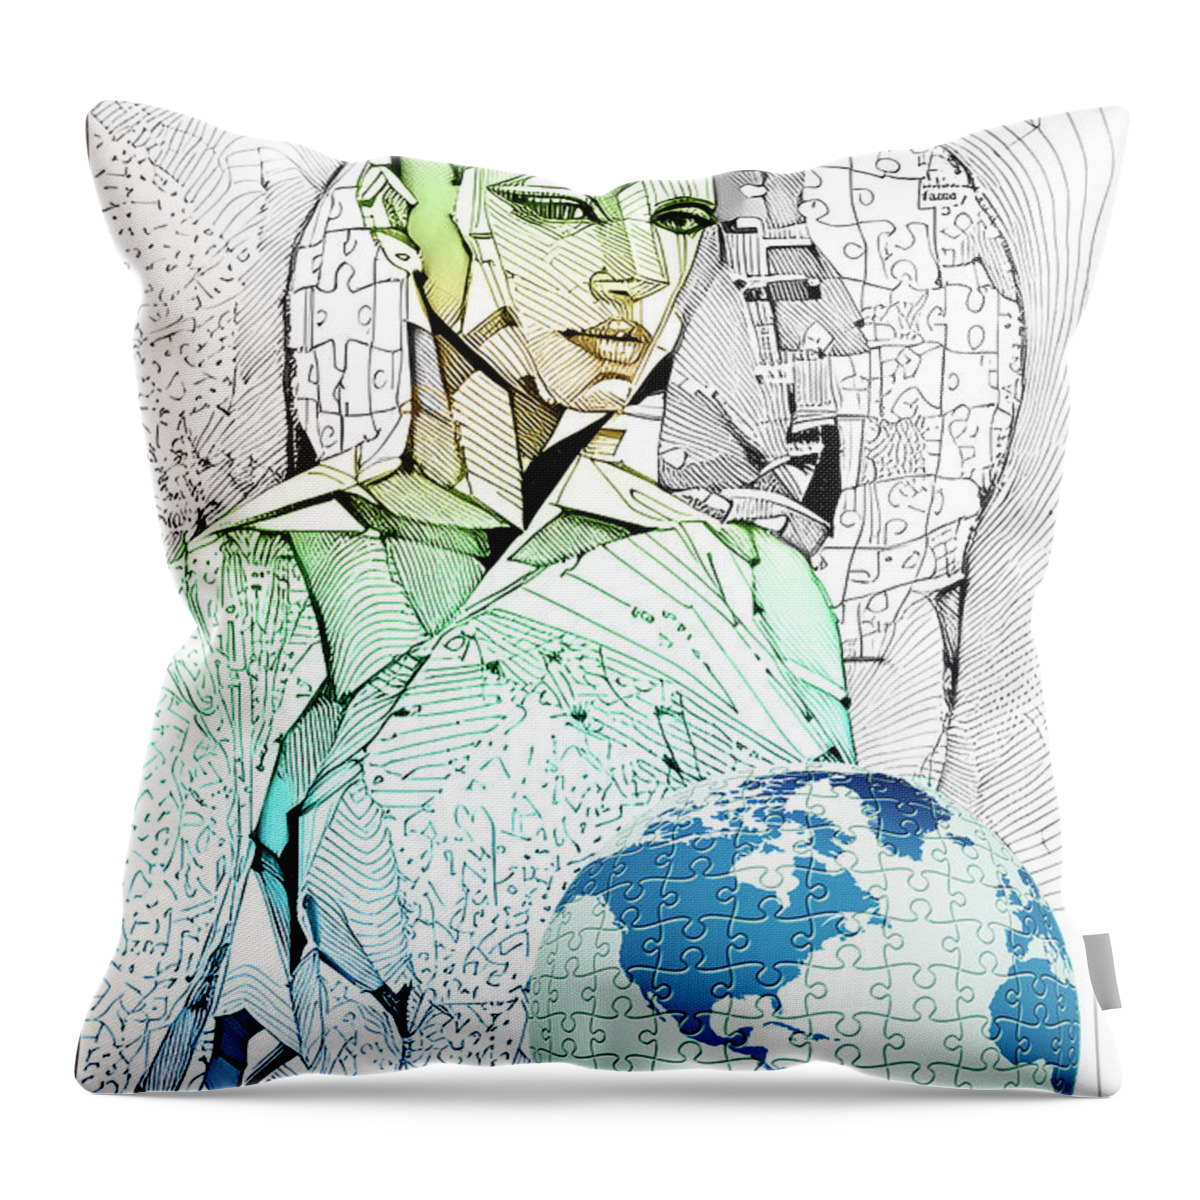 Earth Throw Pillow featuring the digital art Anon Aaa by Shadowlea Is